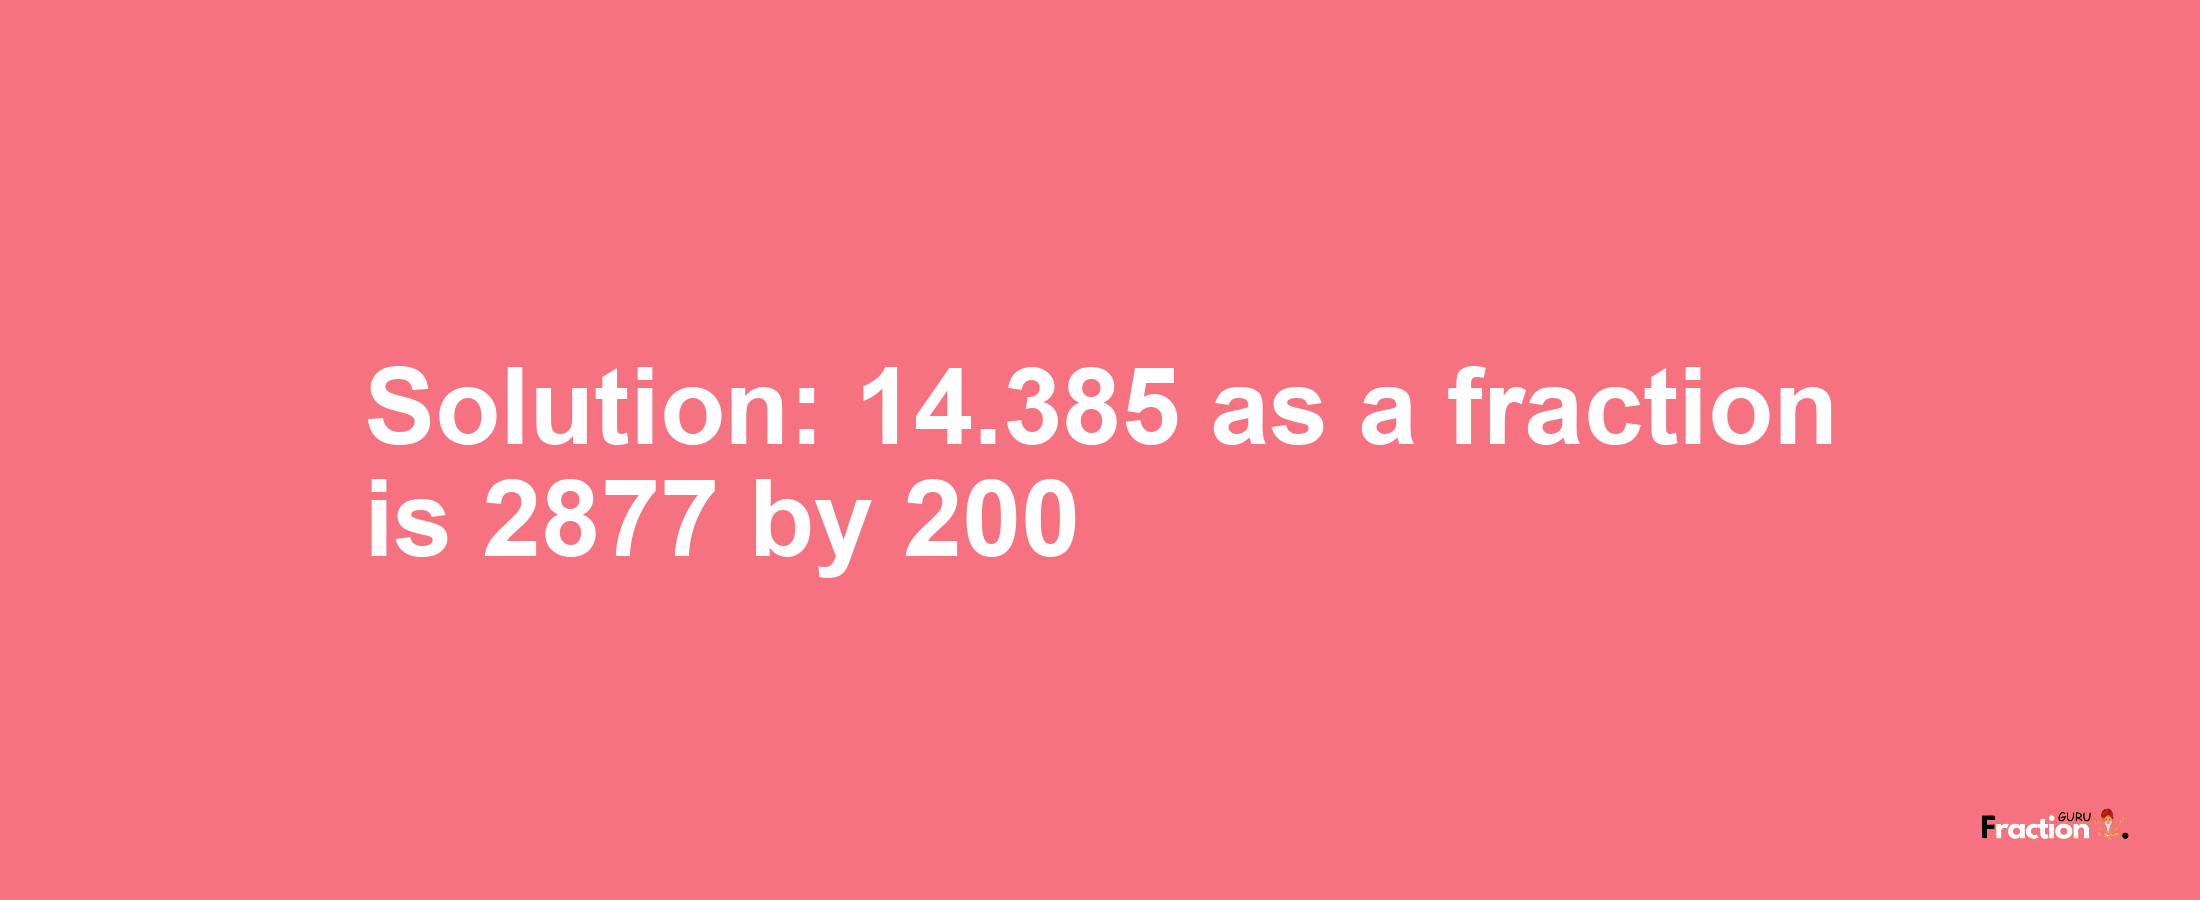 Solution:14.385 as a fraction is 2877/200